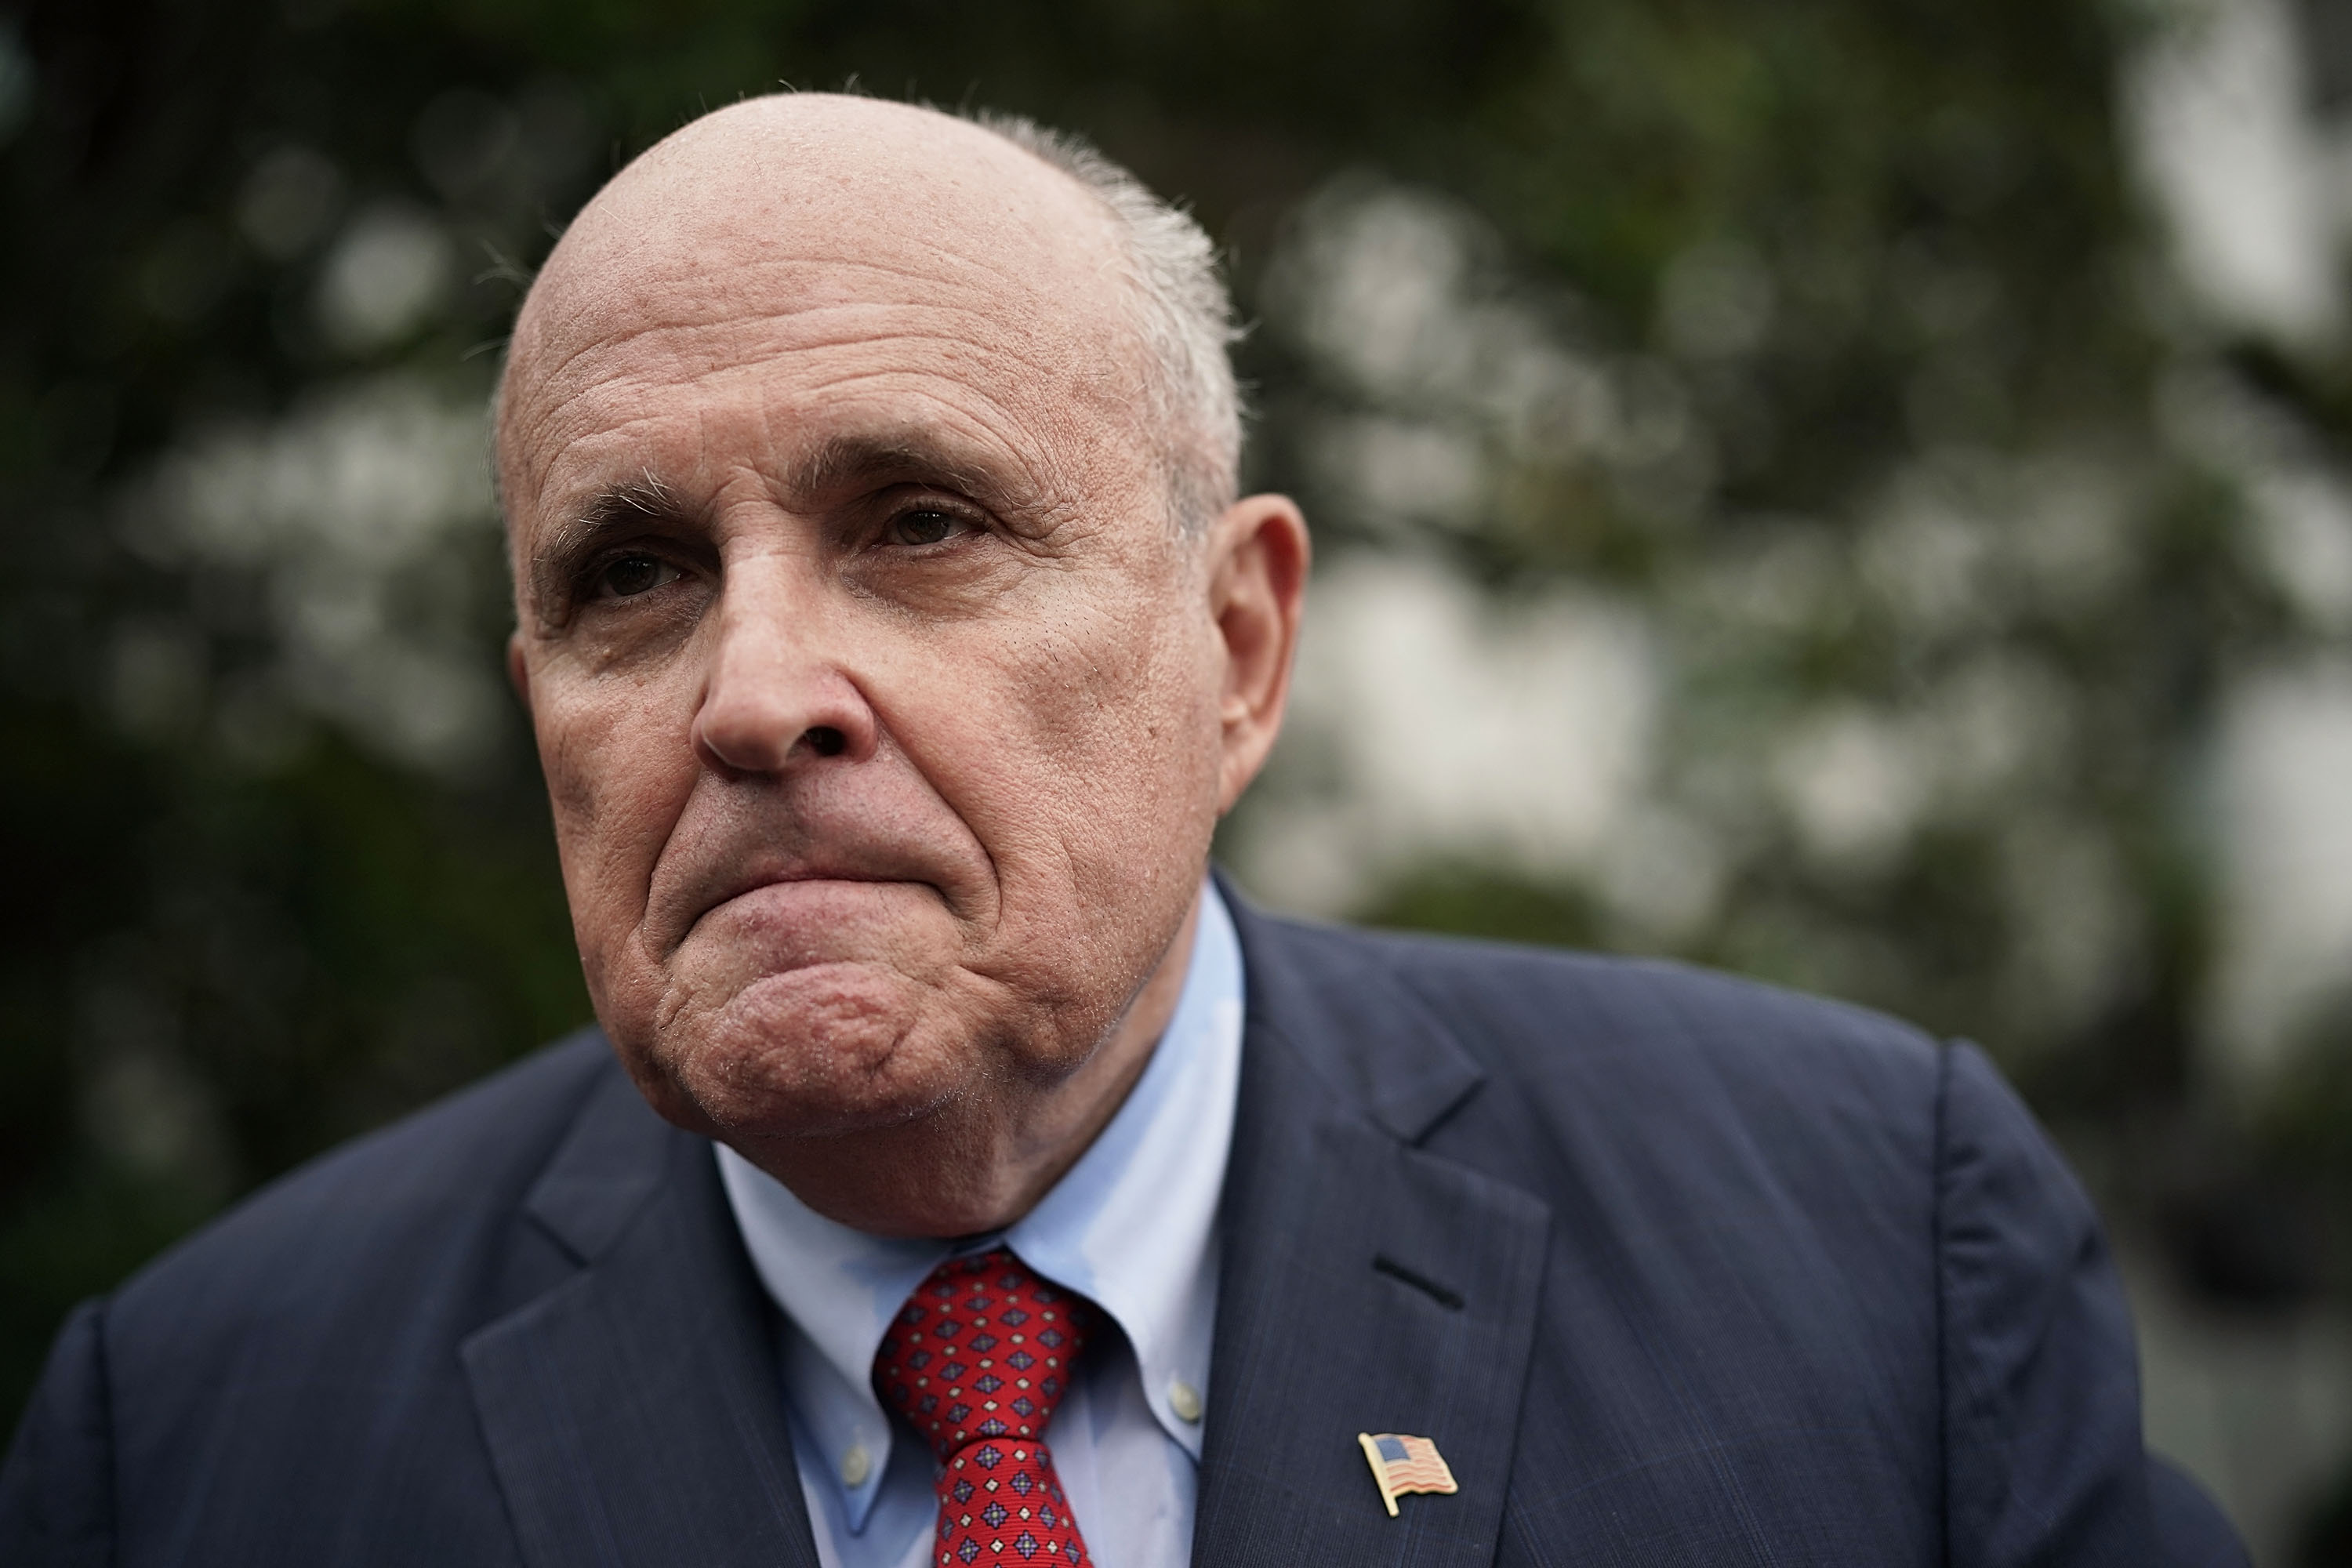 Rudy Giuliani, former New York City mayor and current lawyer for U.S. President Donald Trump, speaks to members of the media during a White House Sports and Fitness Day at the South Lawn of the White House May 30, 2018 in Washington, DC. (Photo by Alex Wong/Getty Images)